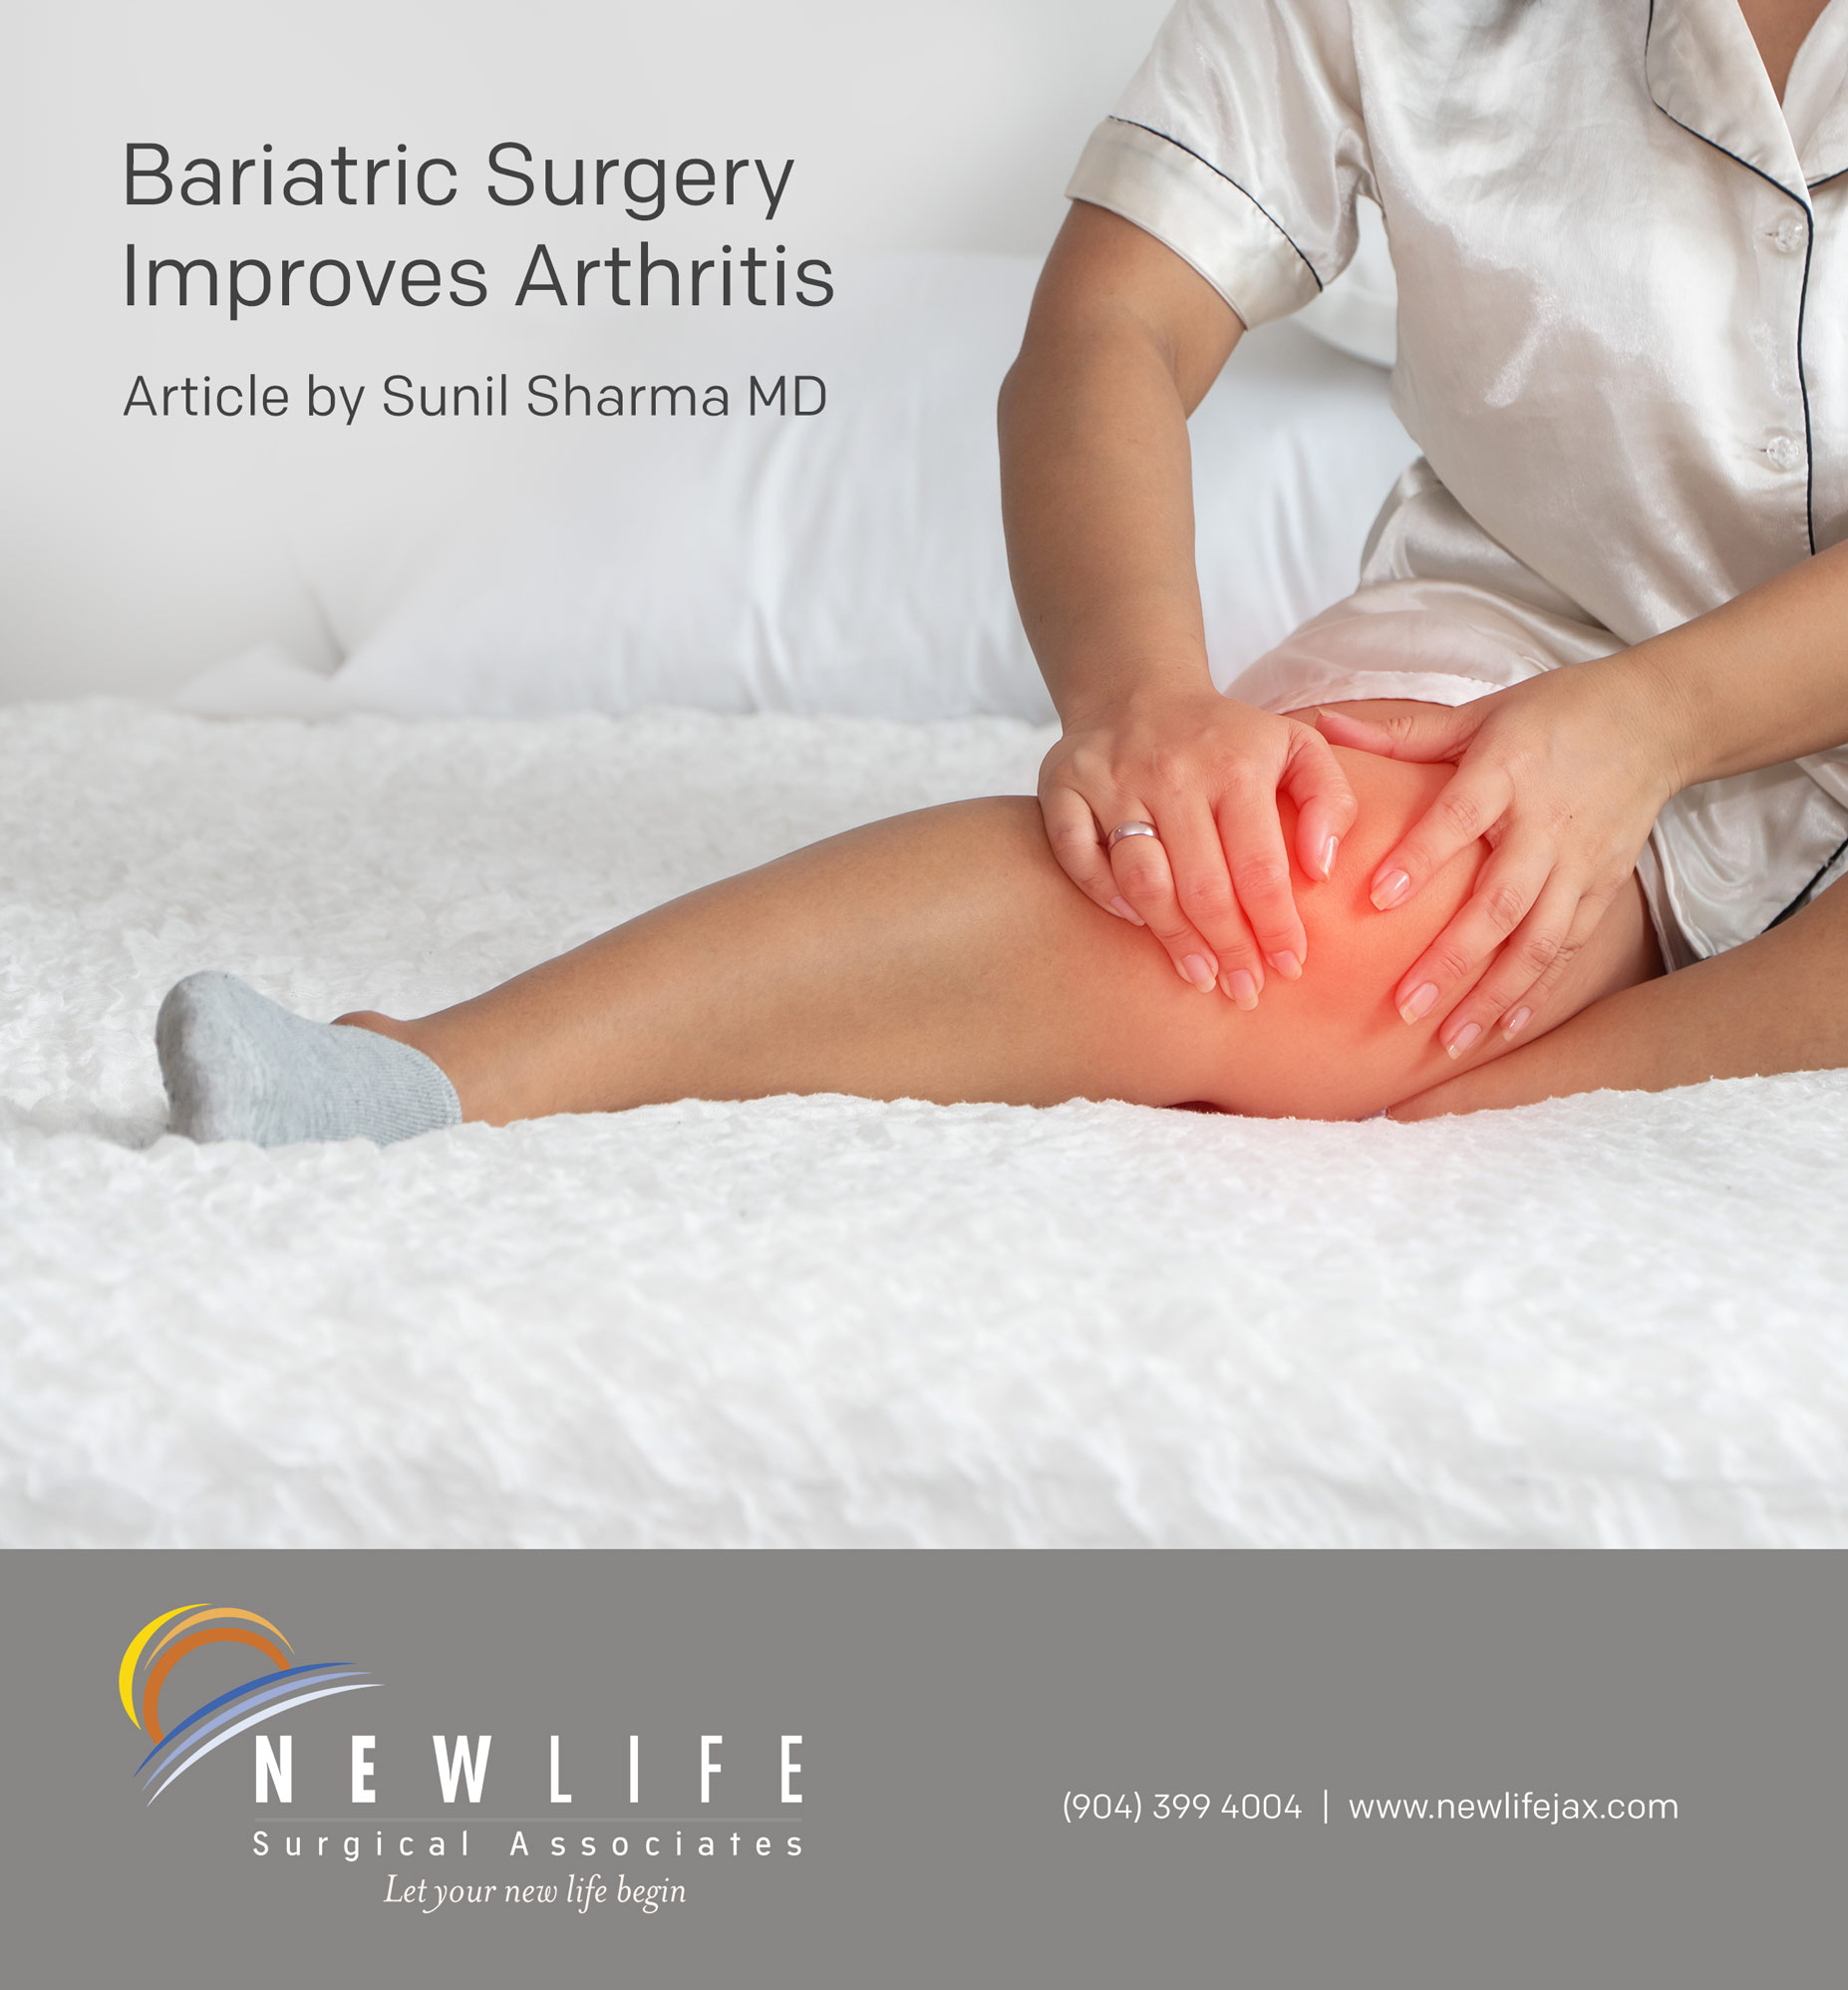 Bariatric Surgery Improves Arthritis – Article by Dr Sunil Sharma MD – Best Bariatric Surgeon Jacksonville Florida